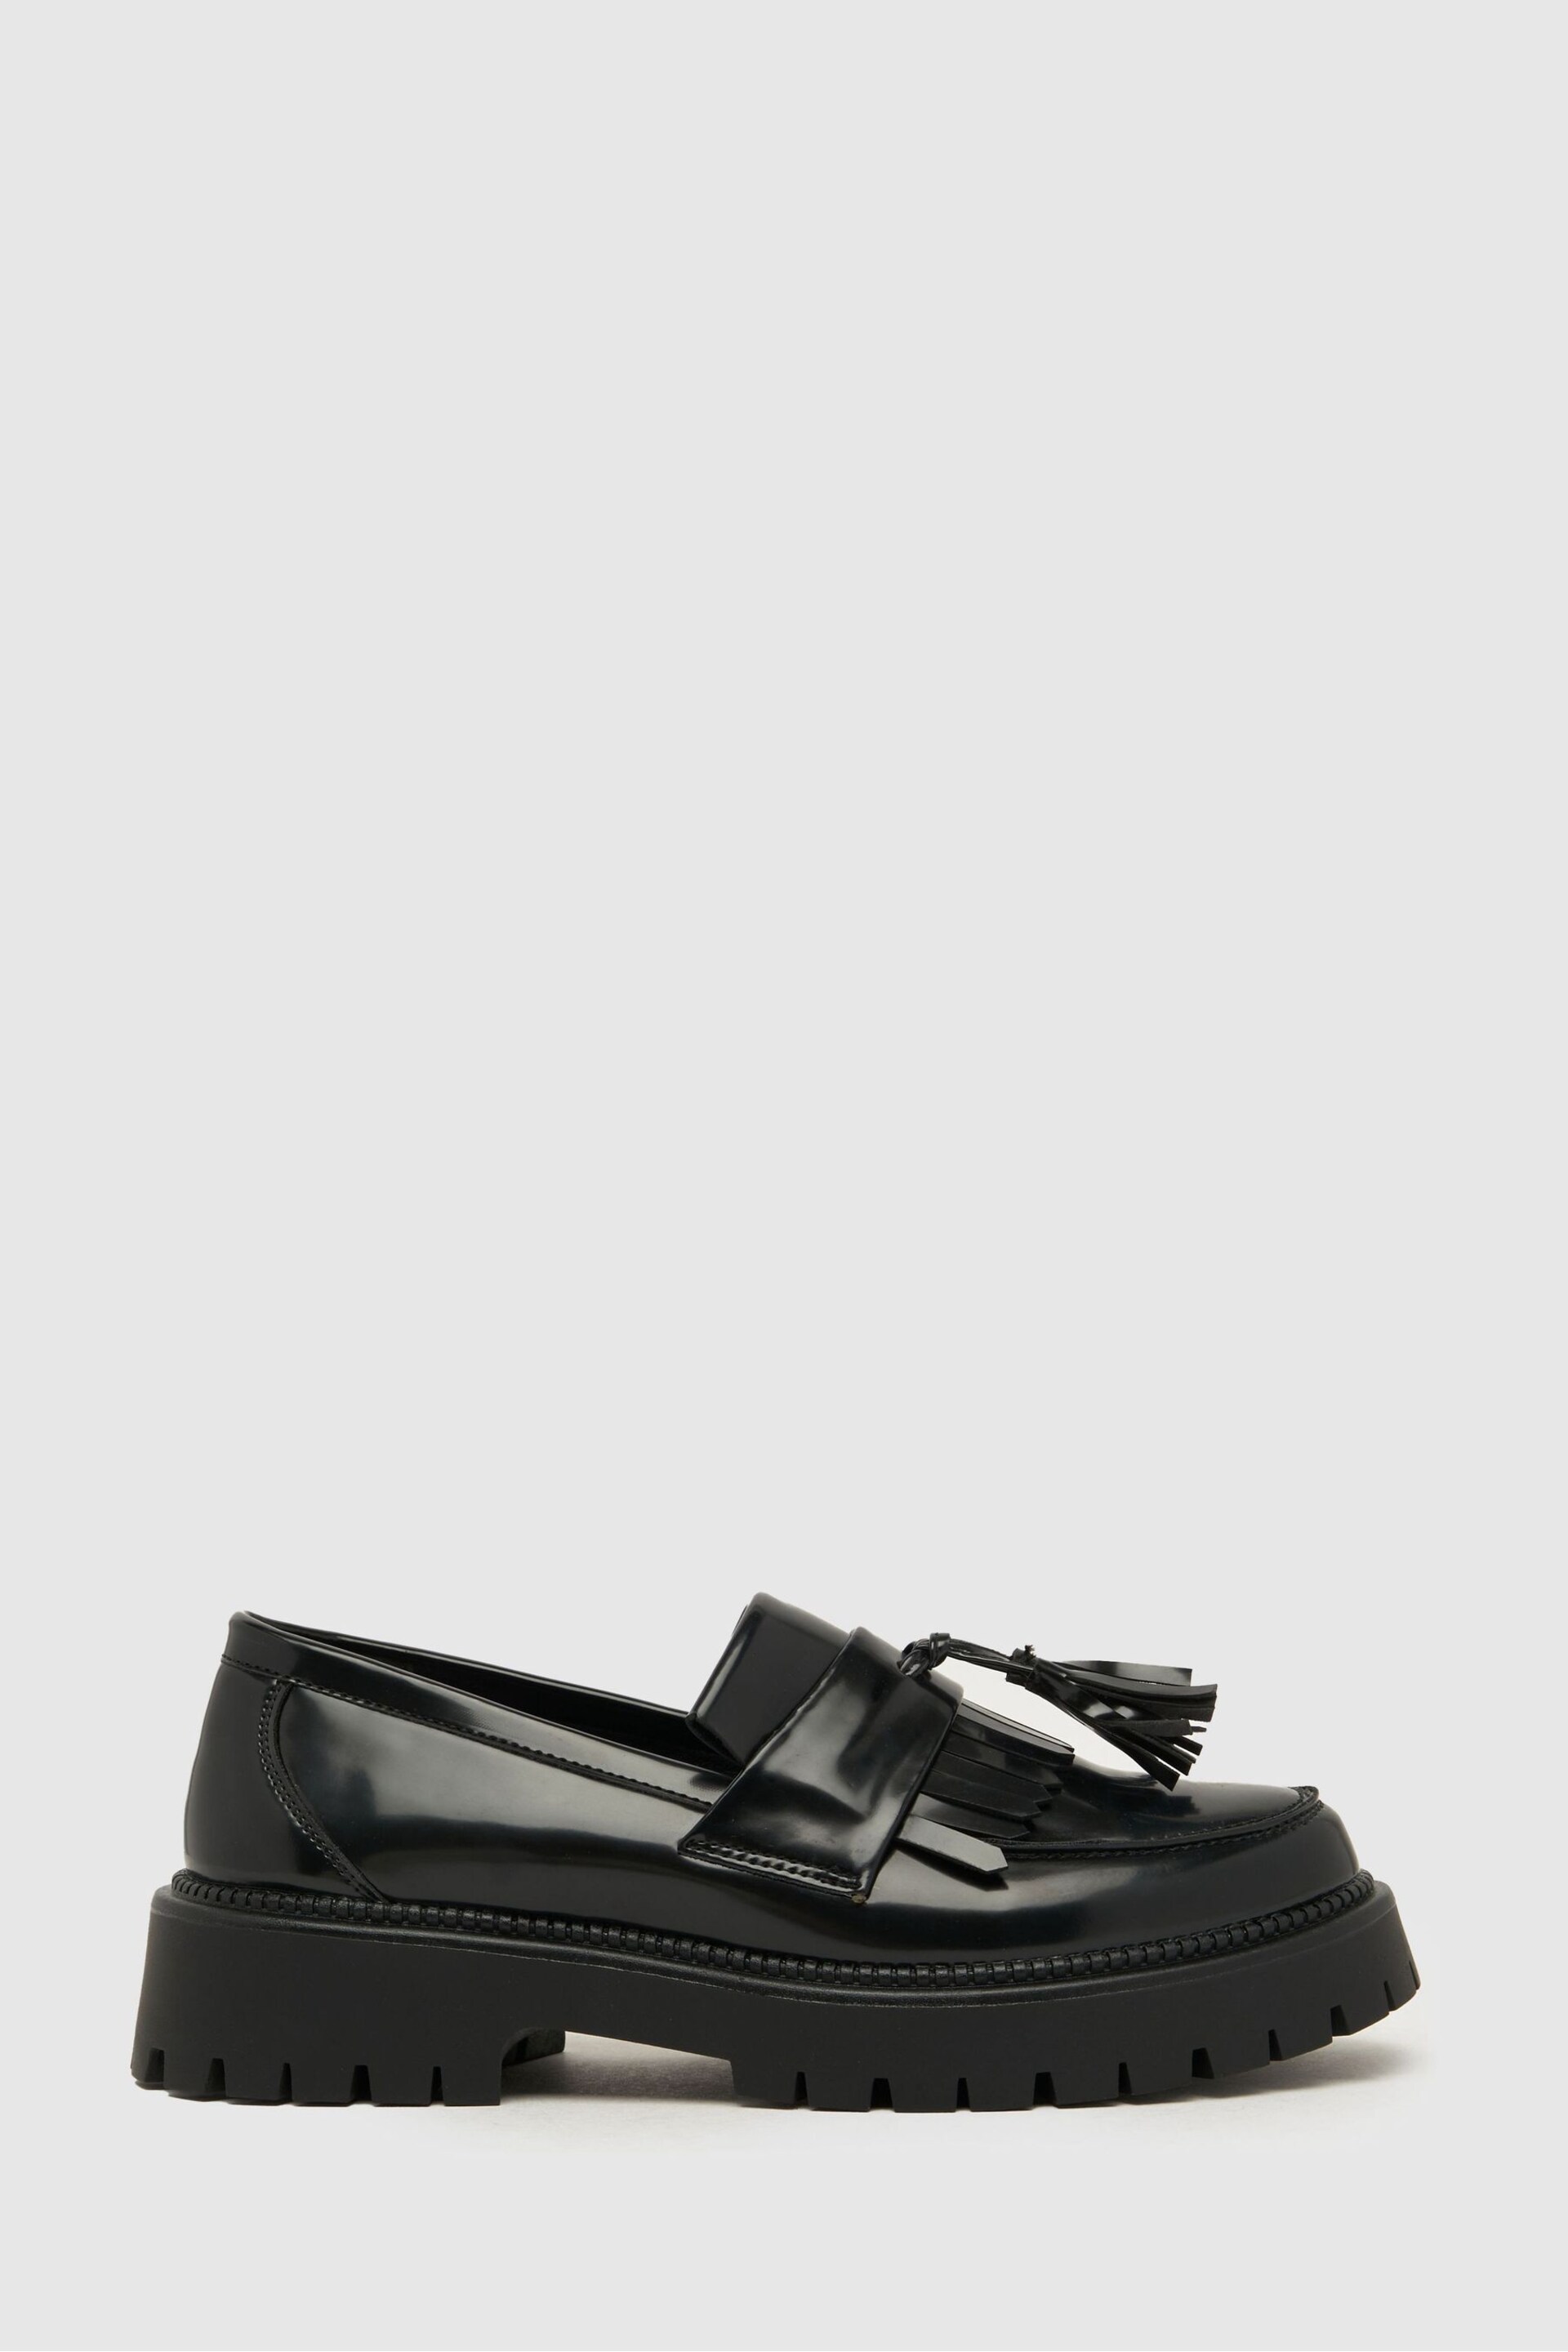 LACHELLE LOAFER - Image 1 of 4